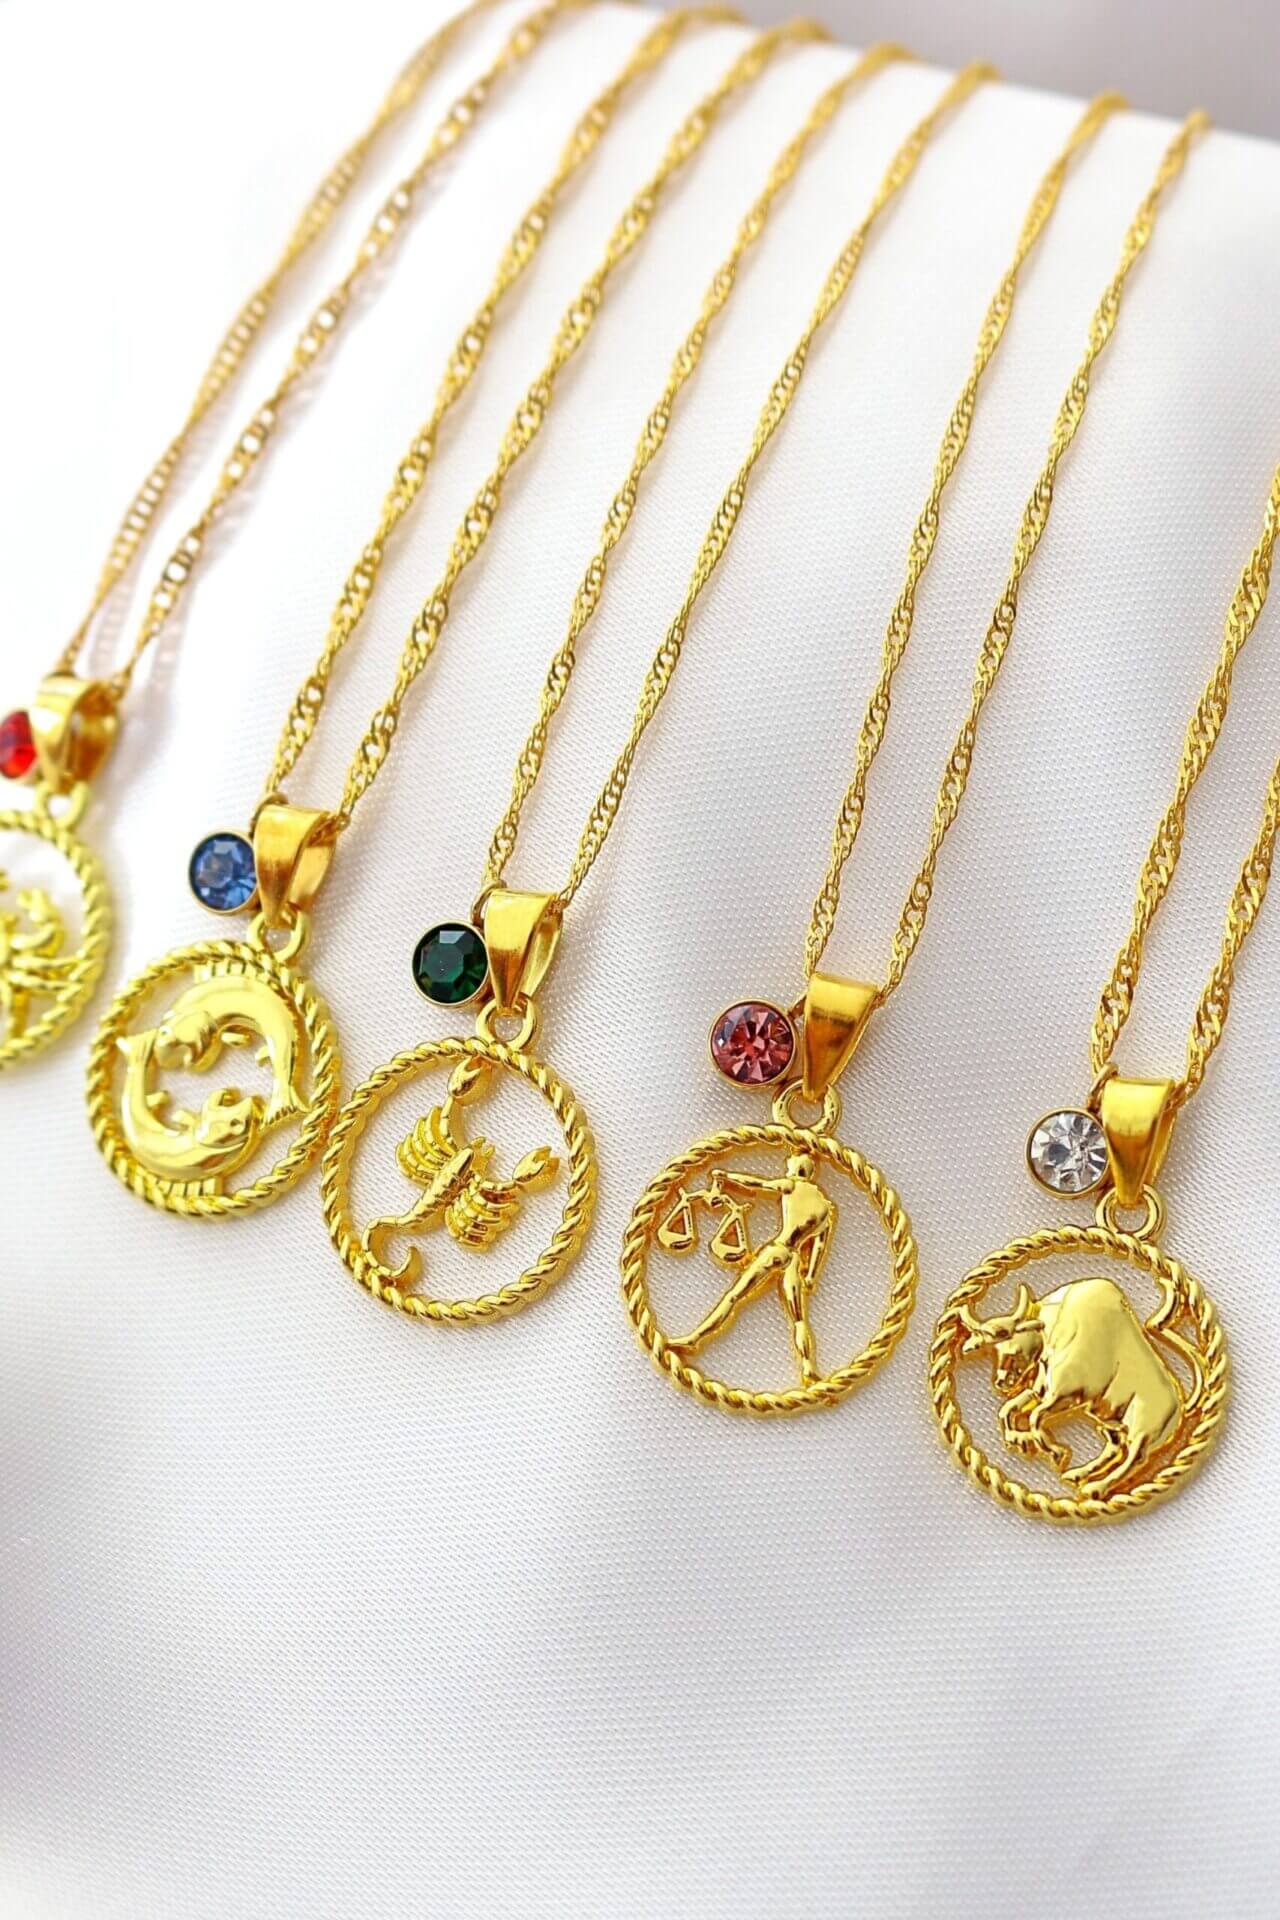 Shop birthstone necklaces online from Palmonas. COD and free shipping. –  PALMONAS